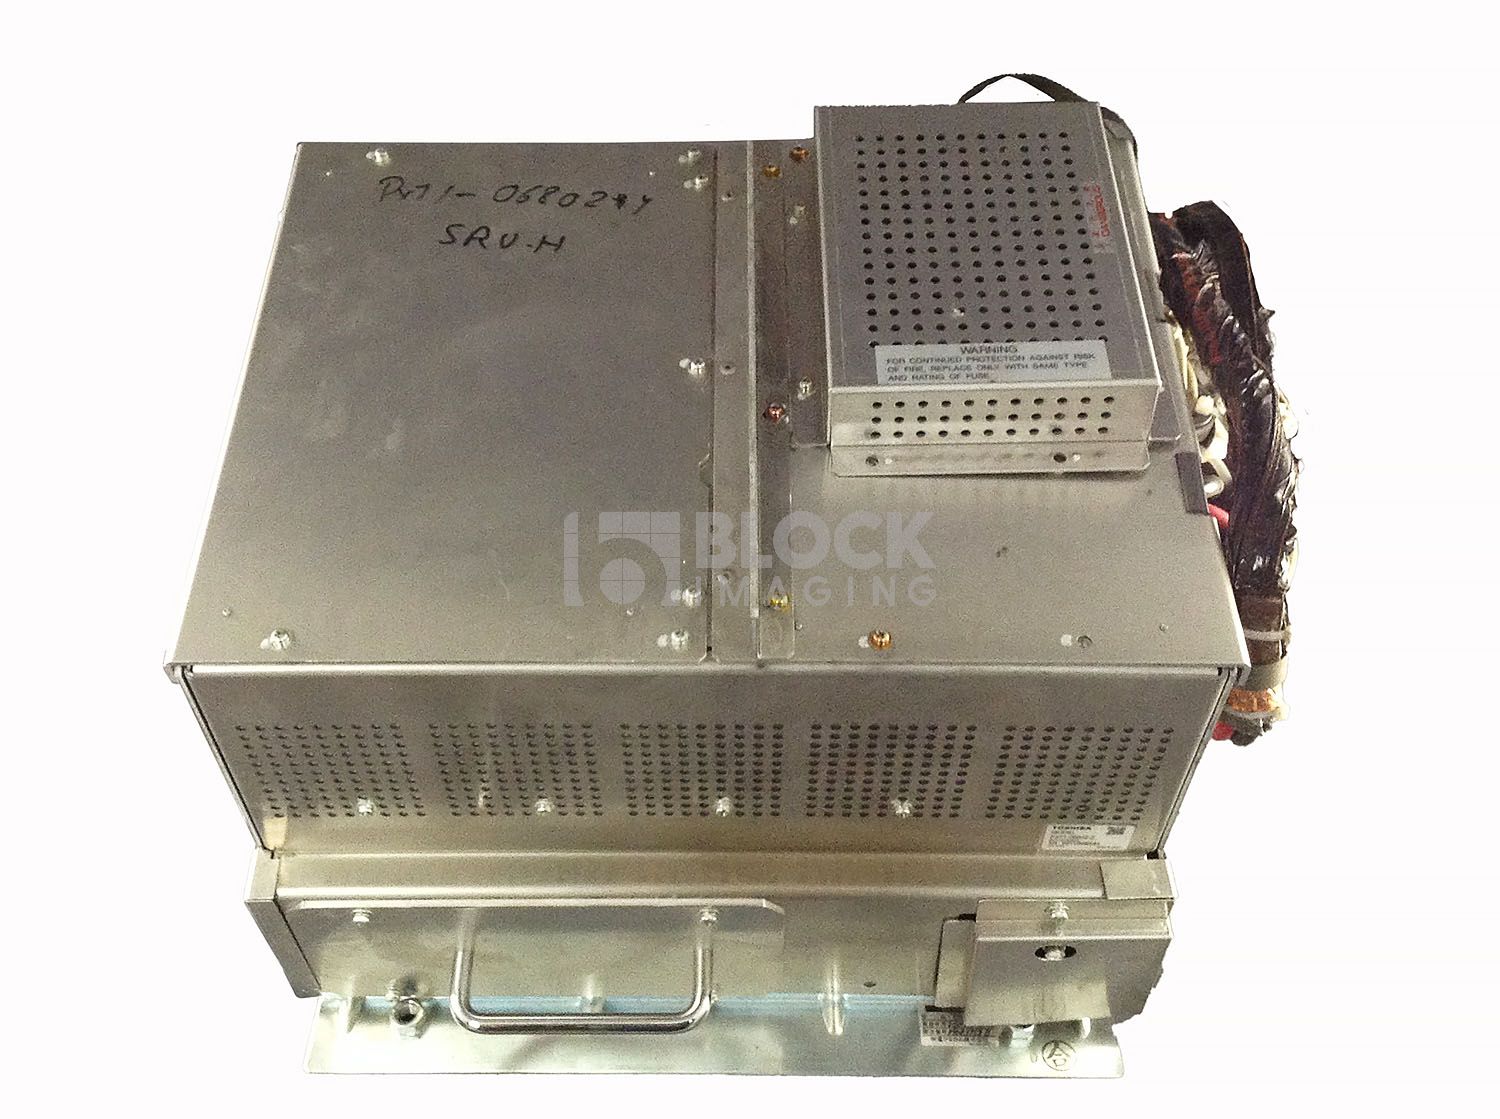 PX71-06802-2 SRU-H Assembly for Toshiba CT | Block Imaging